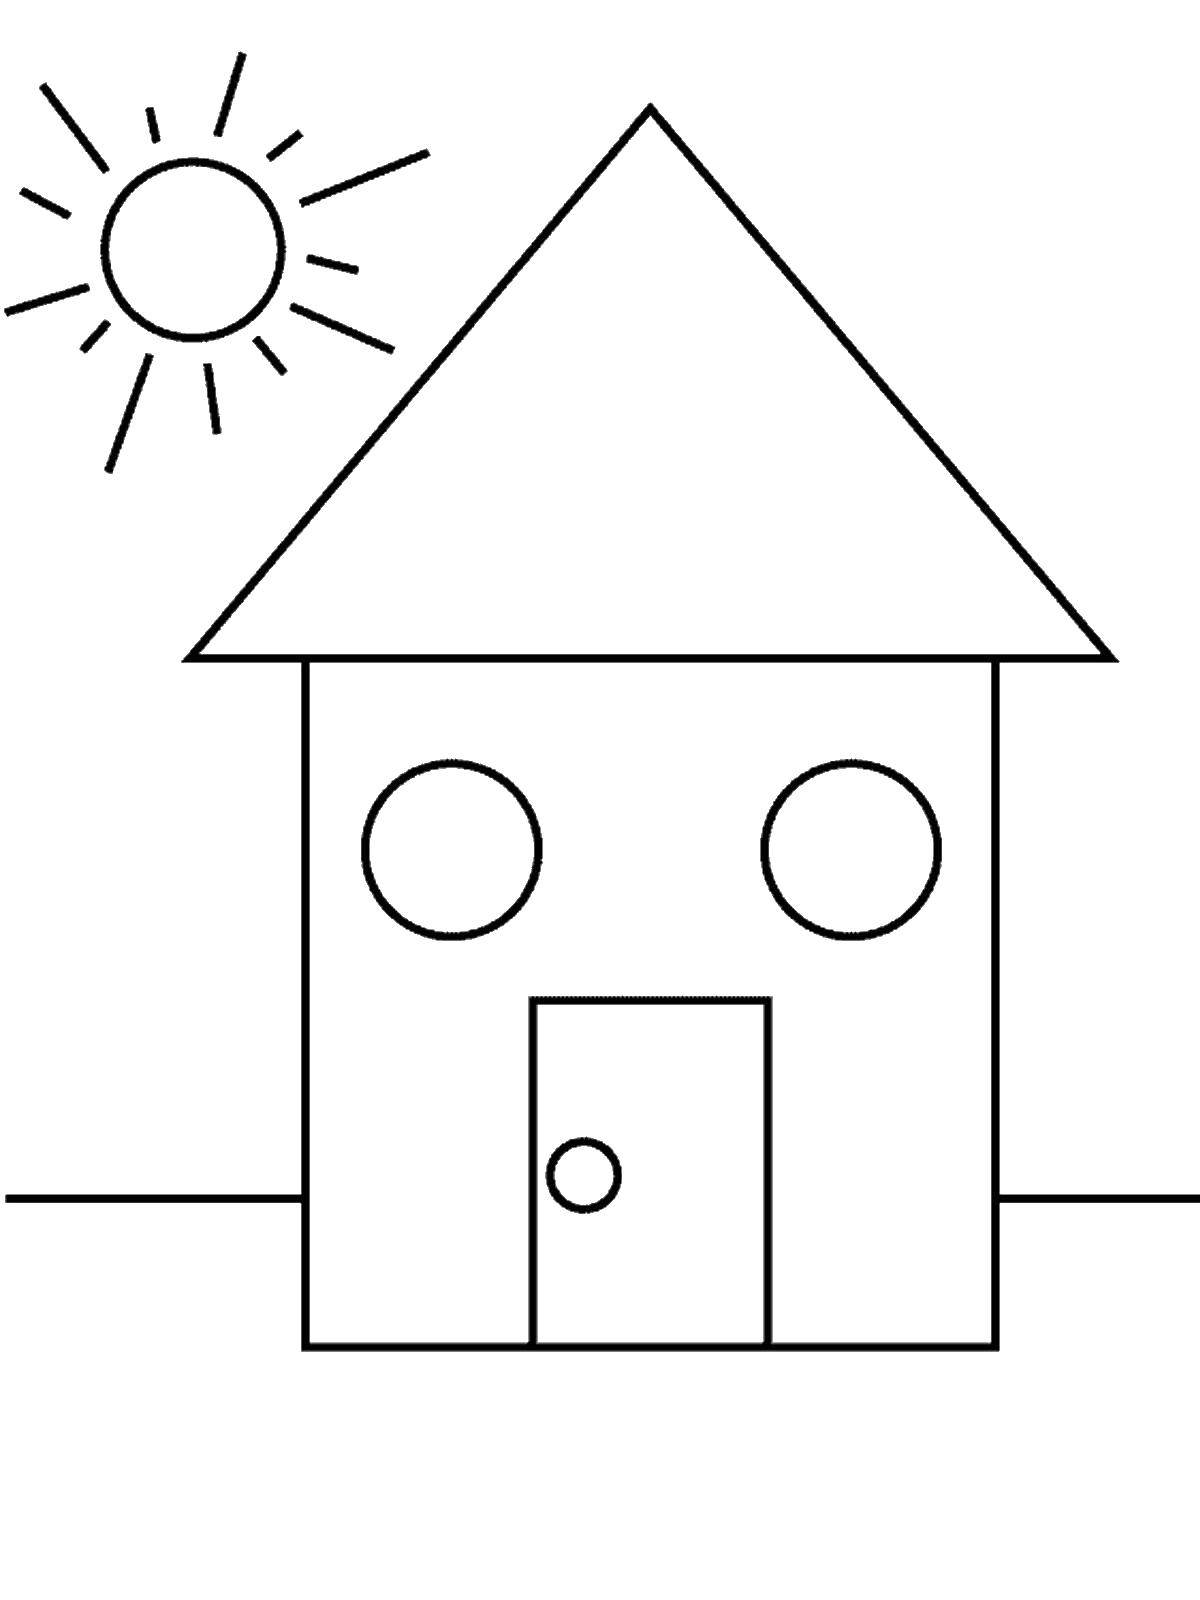 Coloring The house and the sun. Category coloring of the figures. Tags:  house, sun.